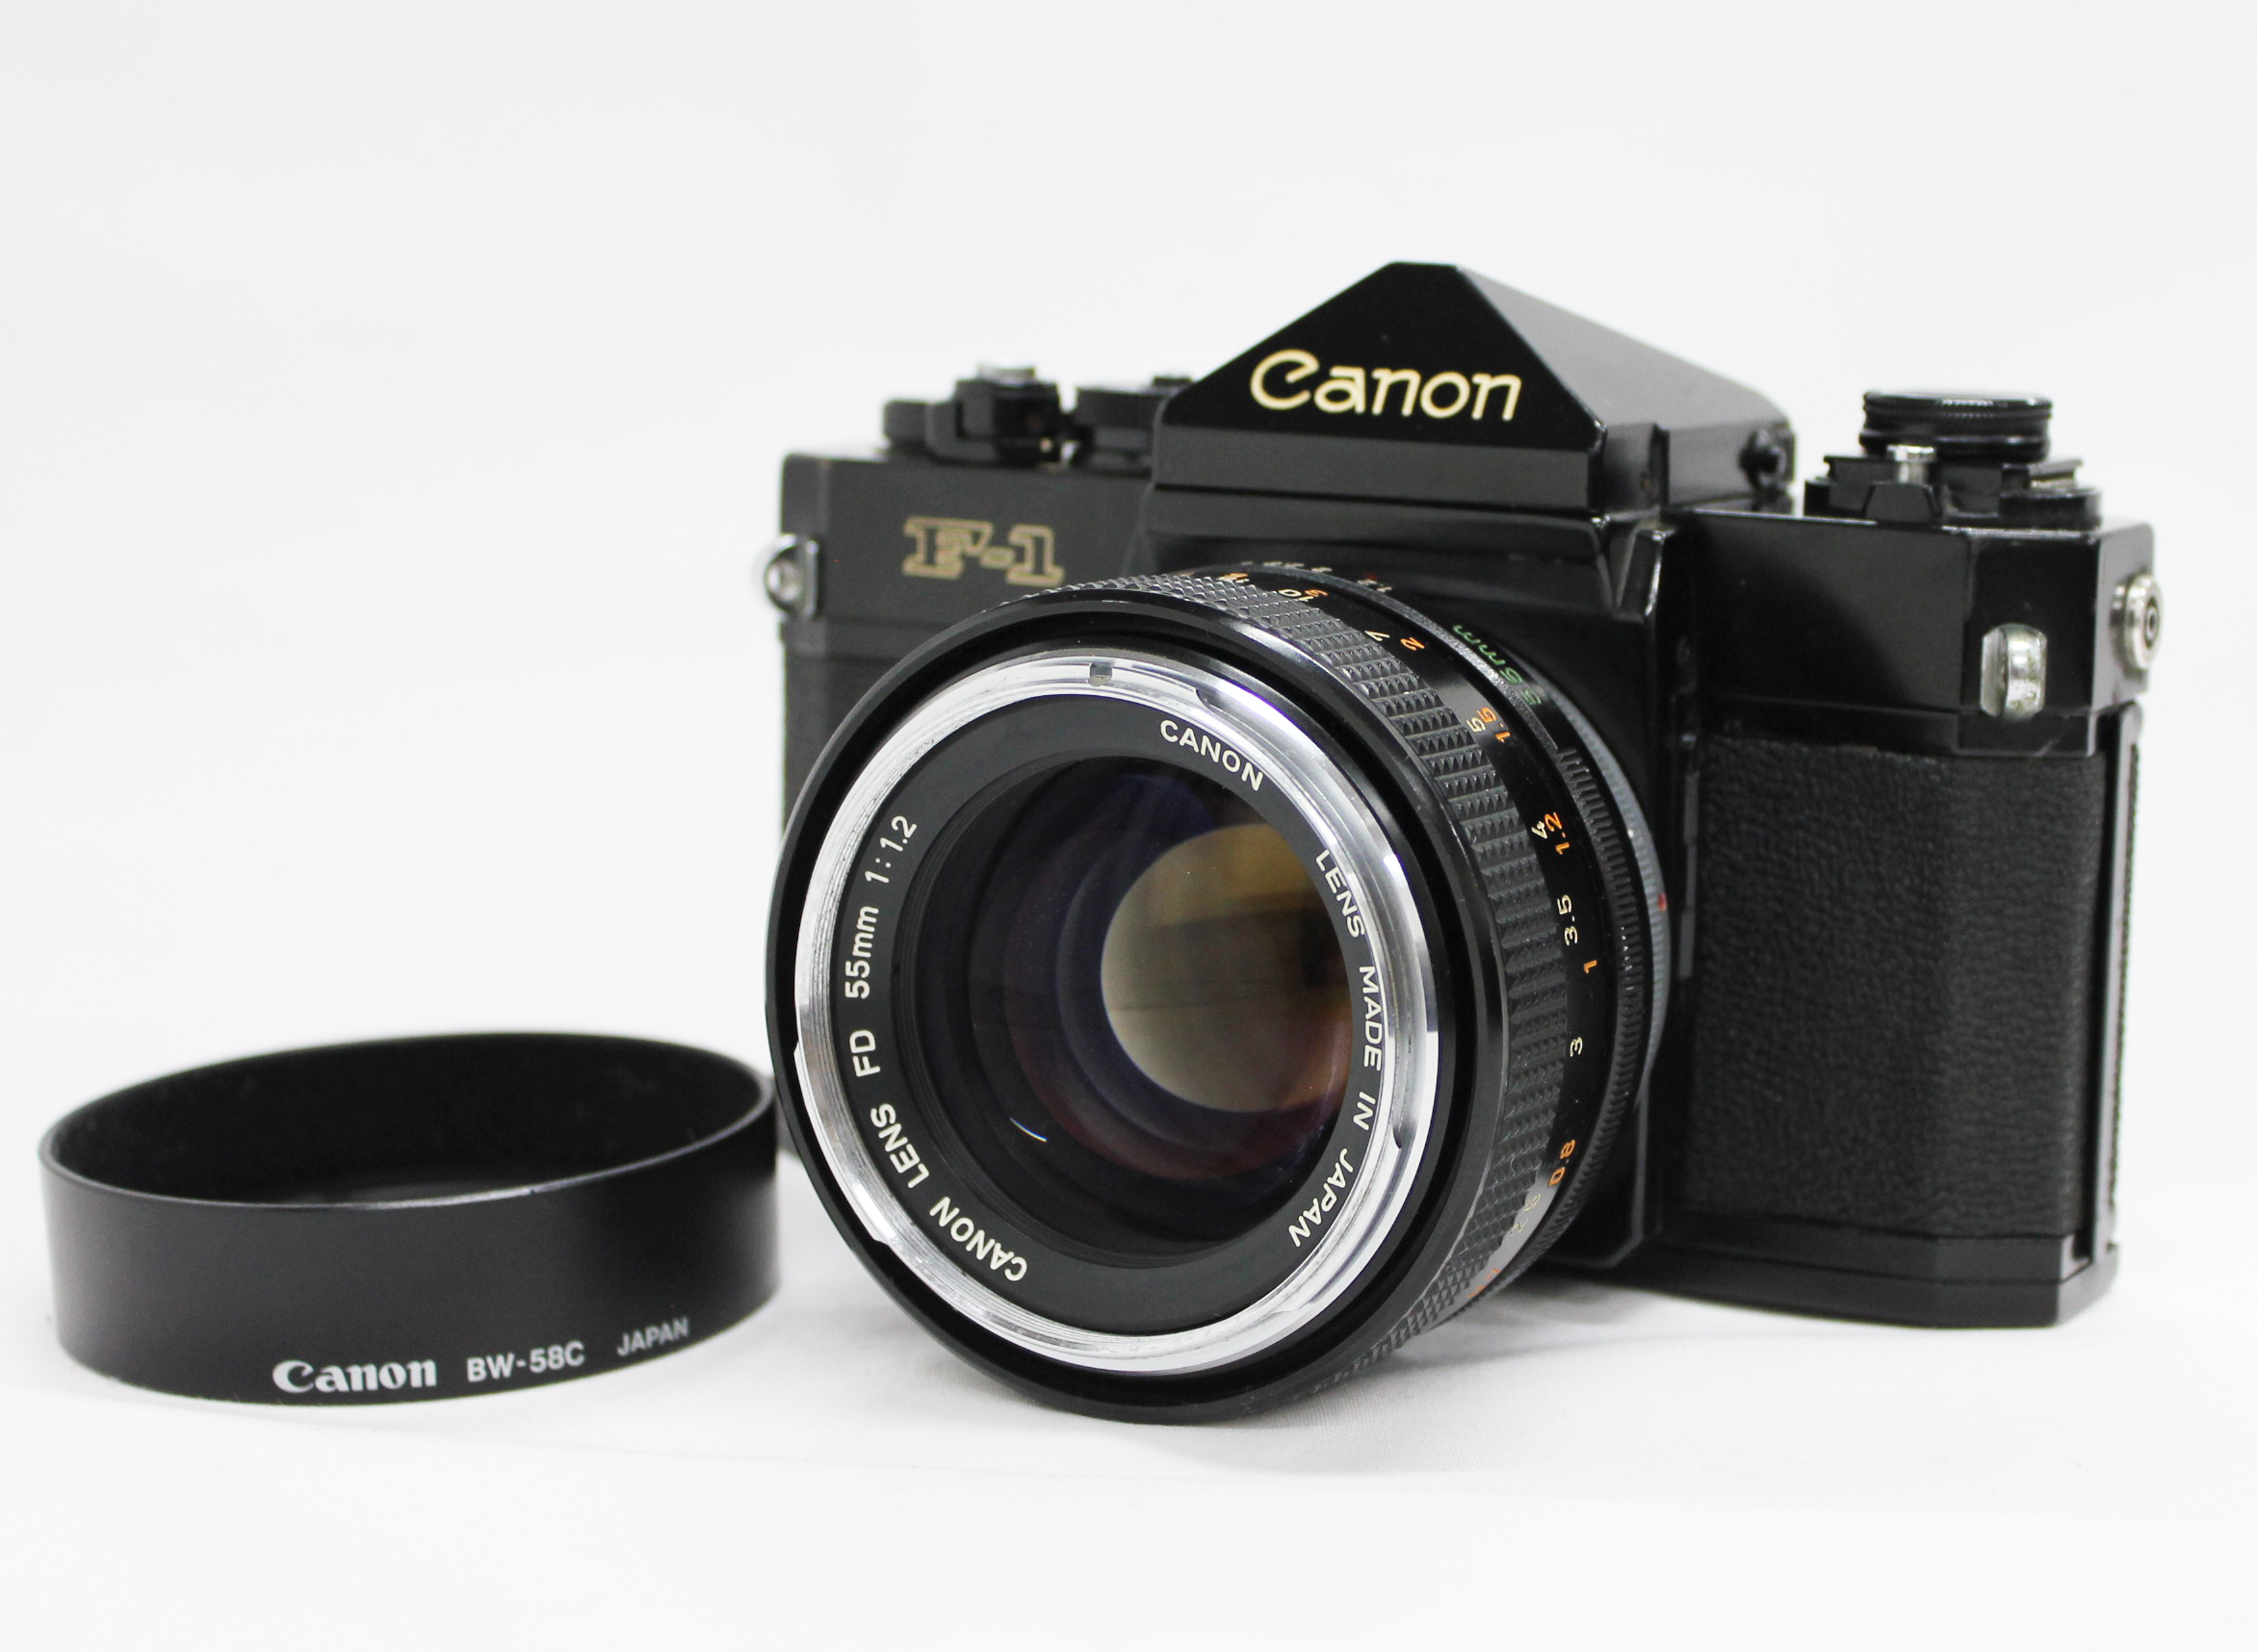 Japan Used Camera Shop | [Excellent+++++] Canon F-1 35mm SLR Film Camera with FD 55mm F/1.2 Lens from Japan